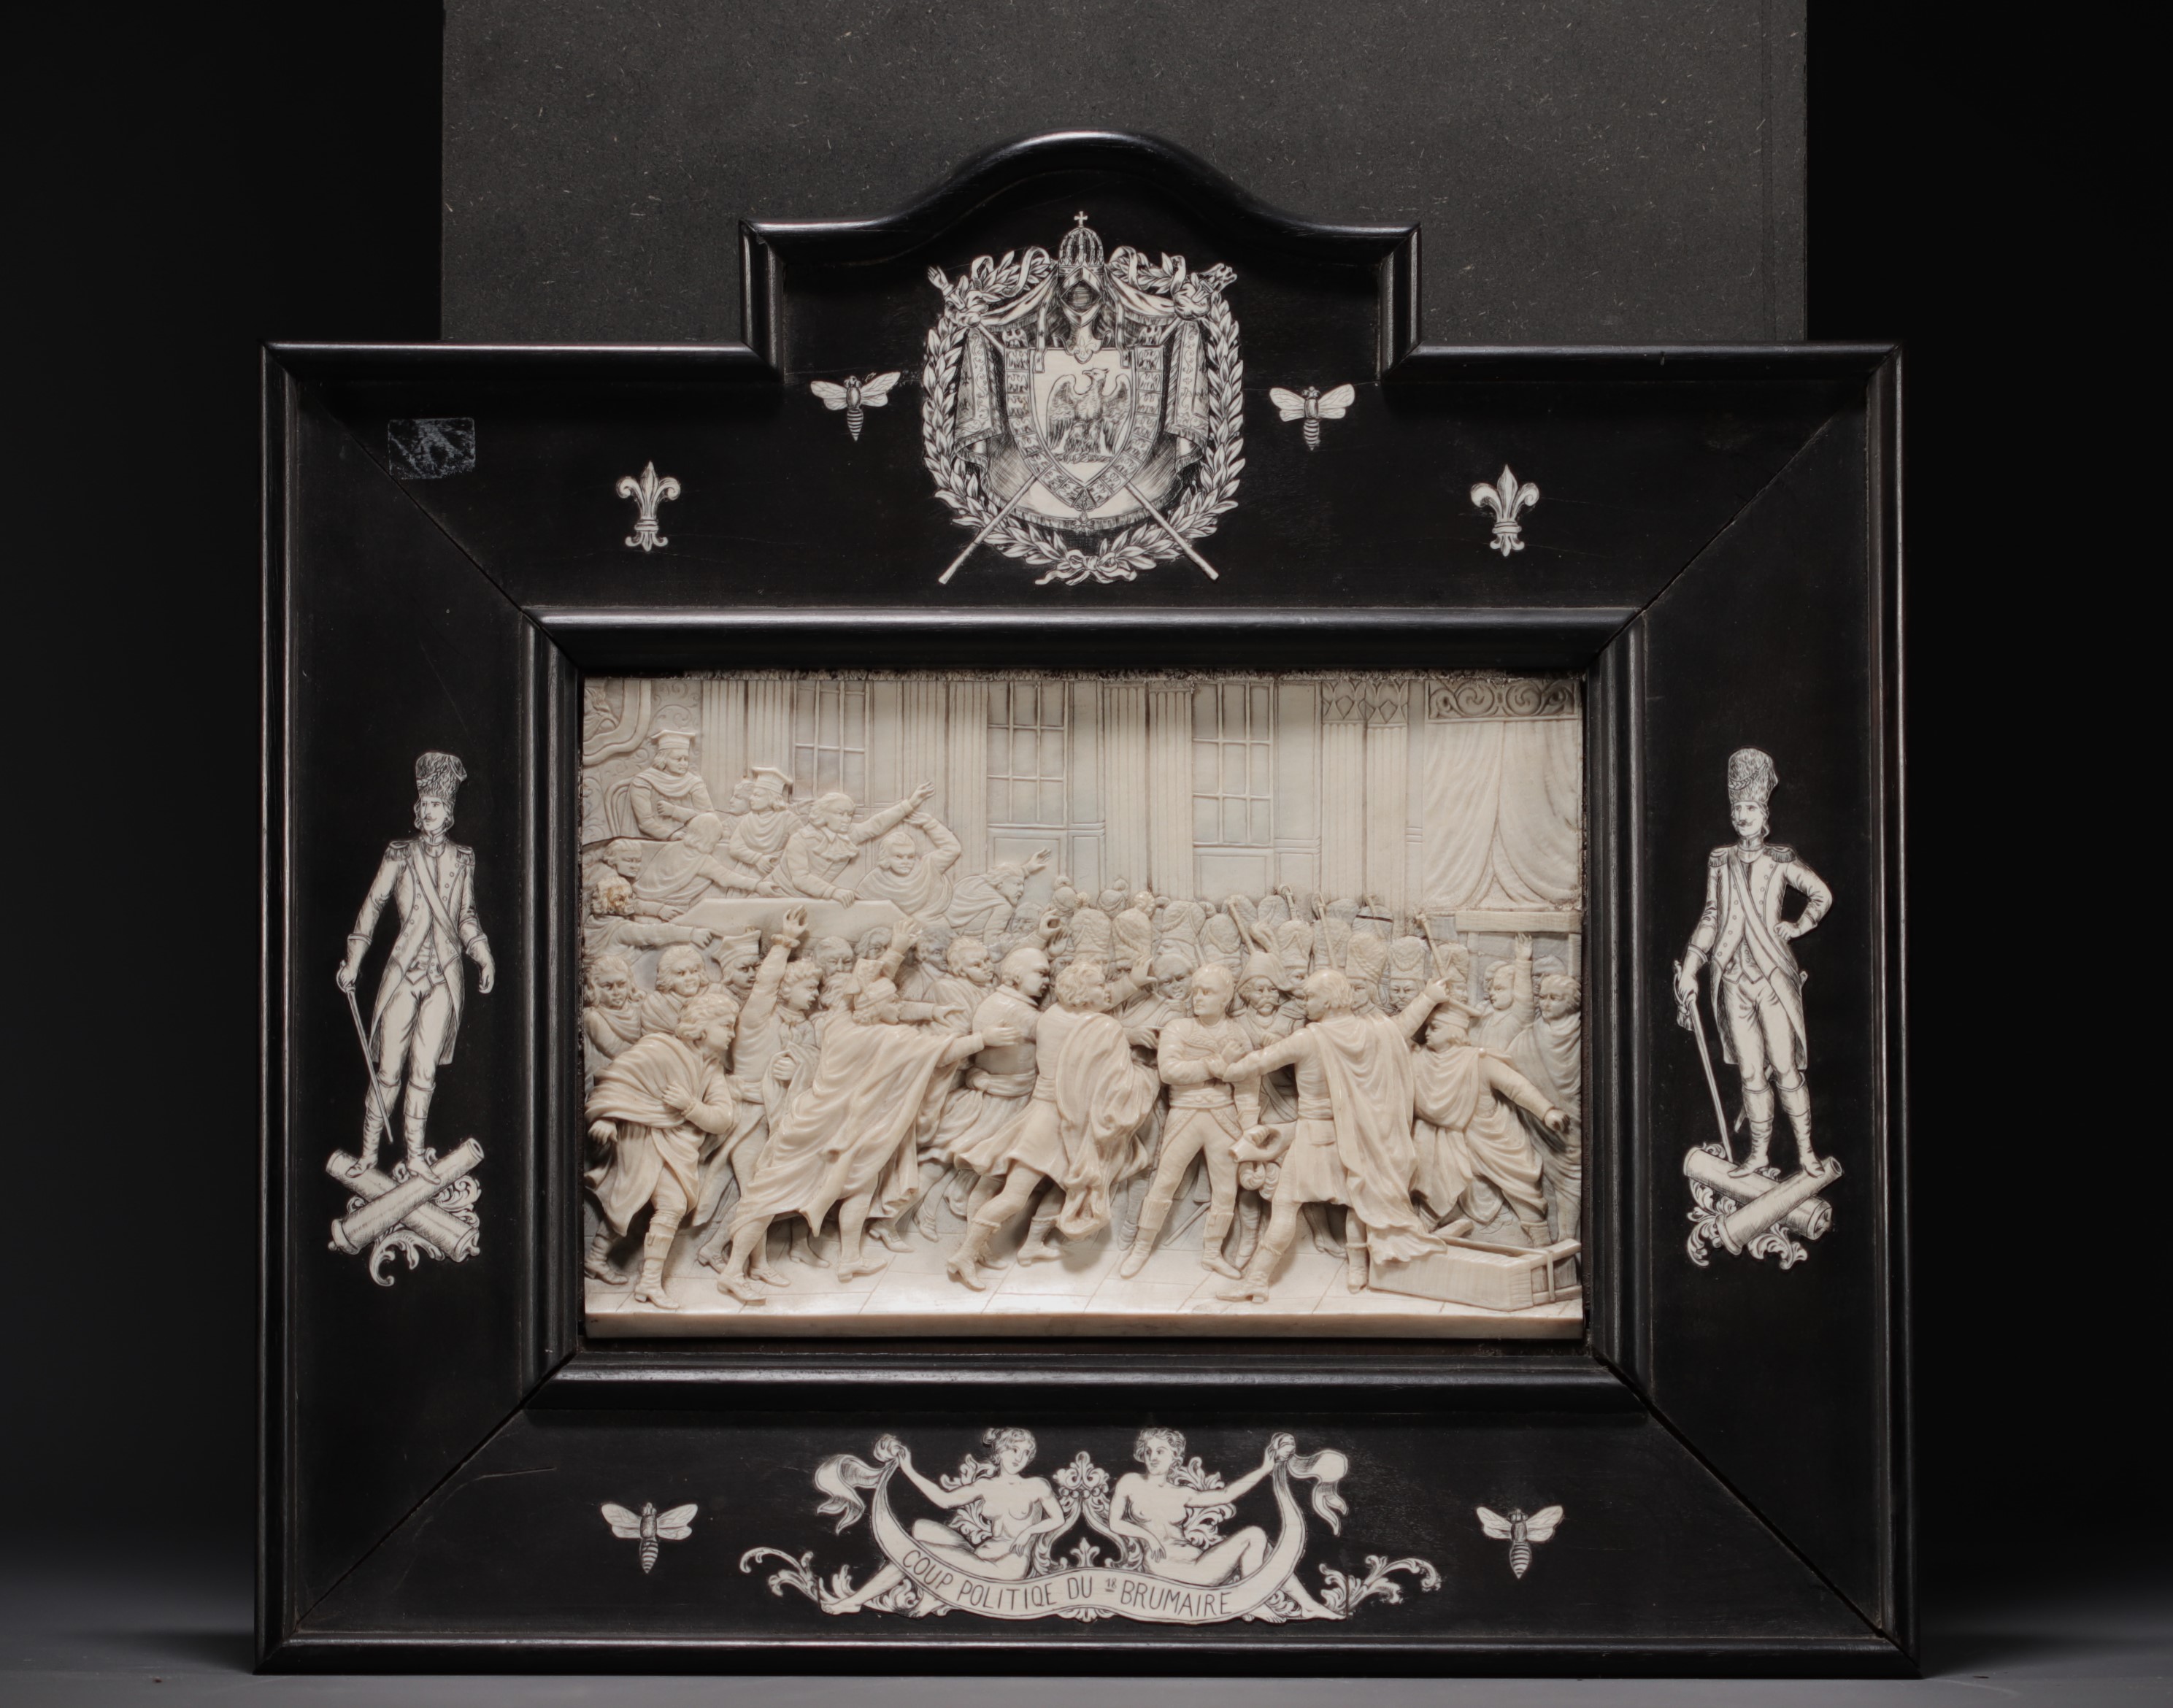 "Coup politique du 18 Brumaire" Low relief painting in carved ivory, 19th century.